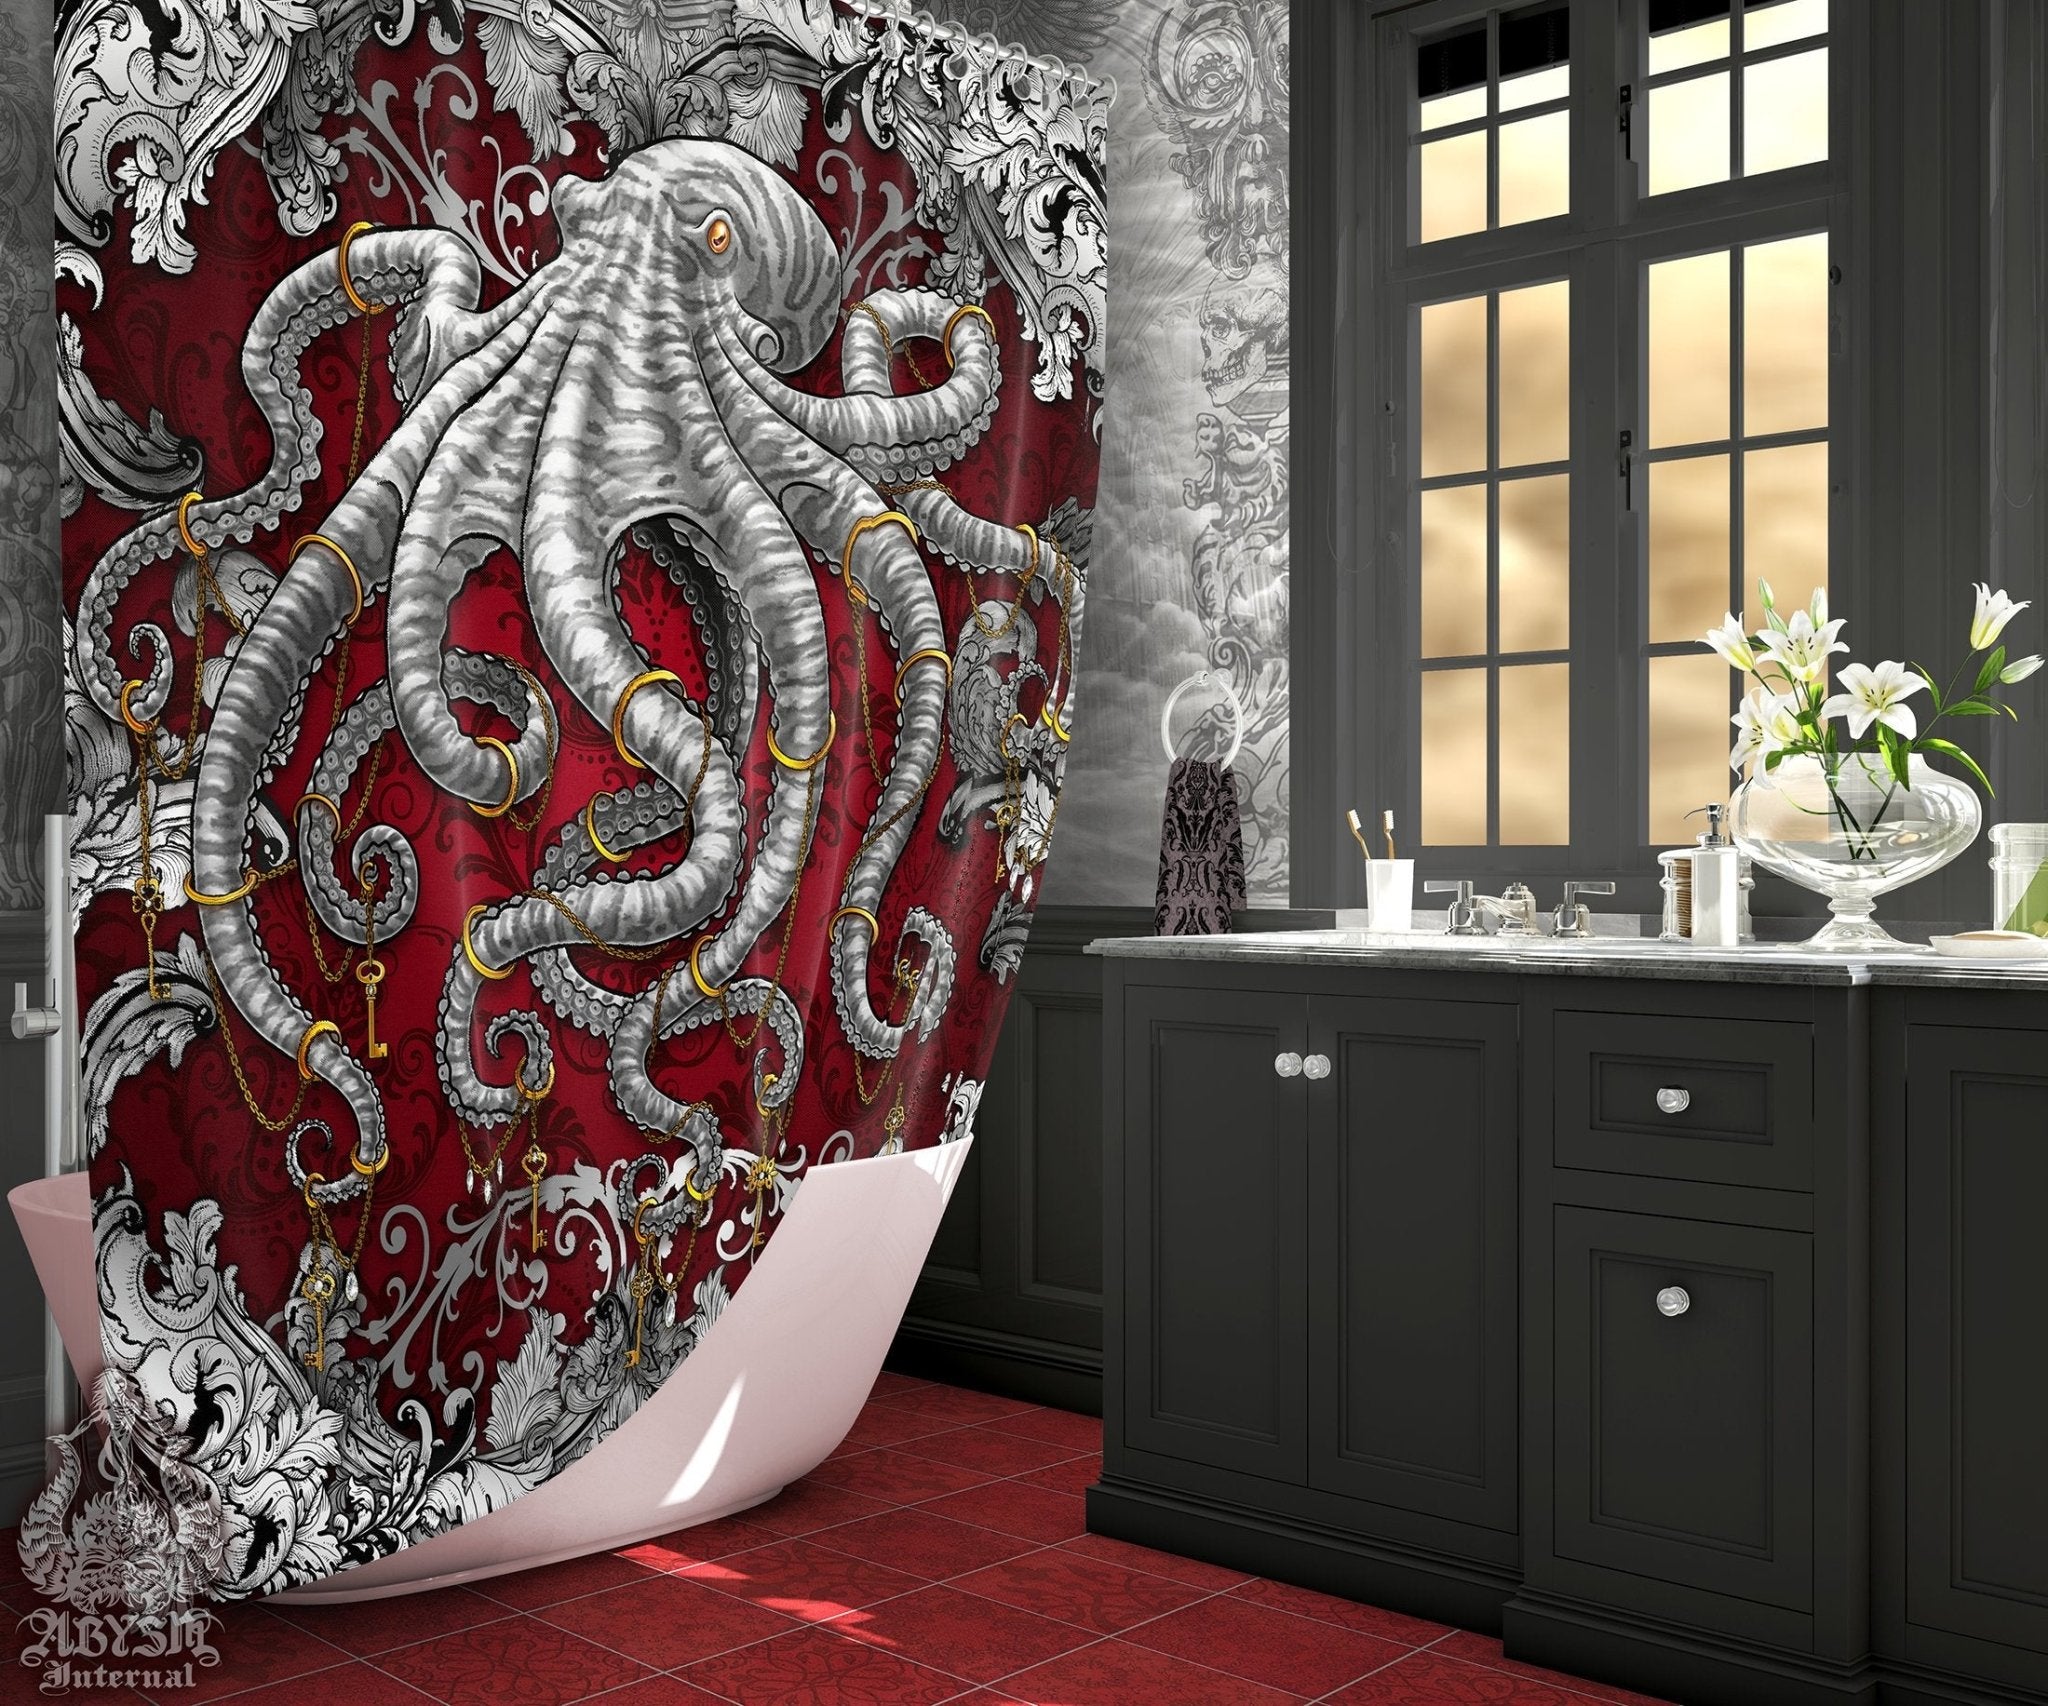 Octopus Shower Curtain, Beach Home and Bathroom Decor - Silver & Red - Abysm Internal